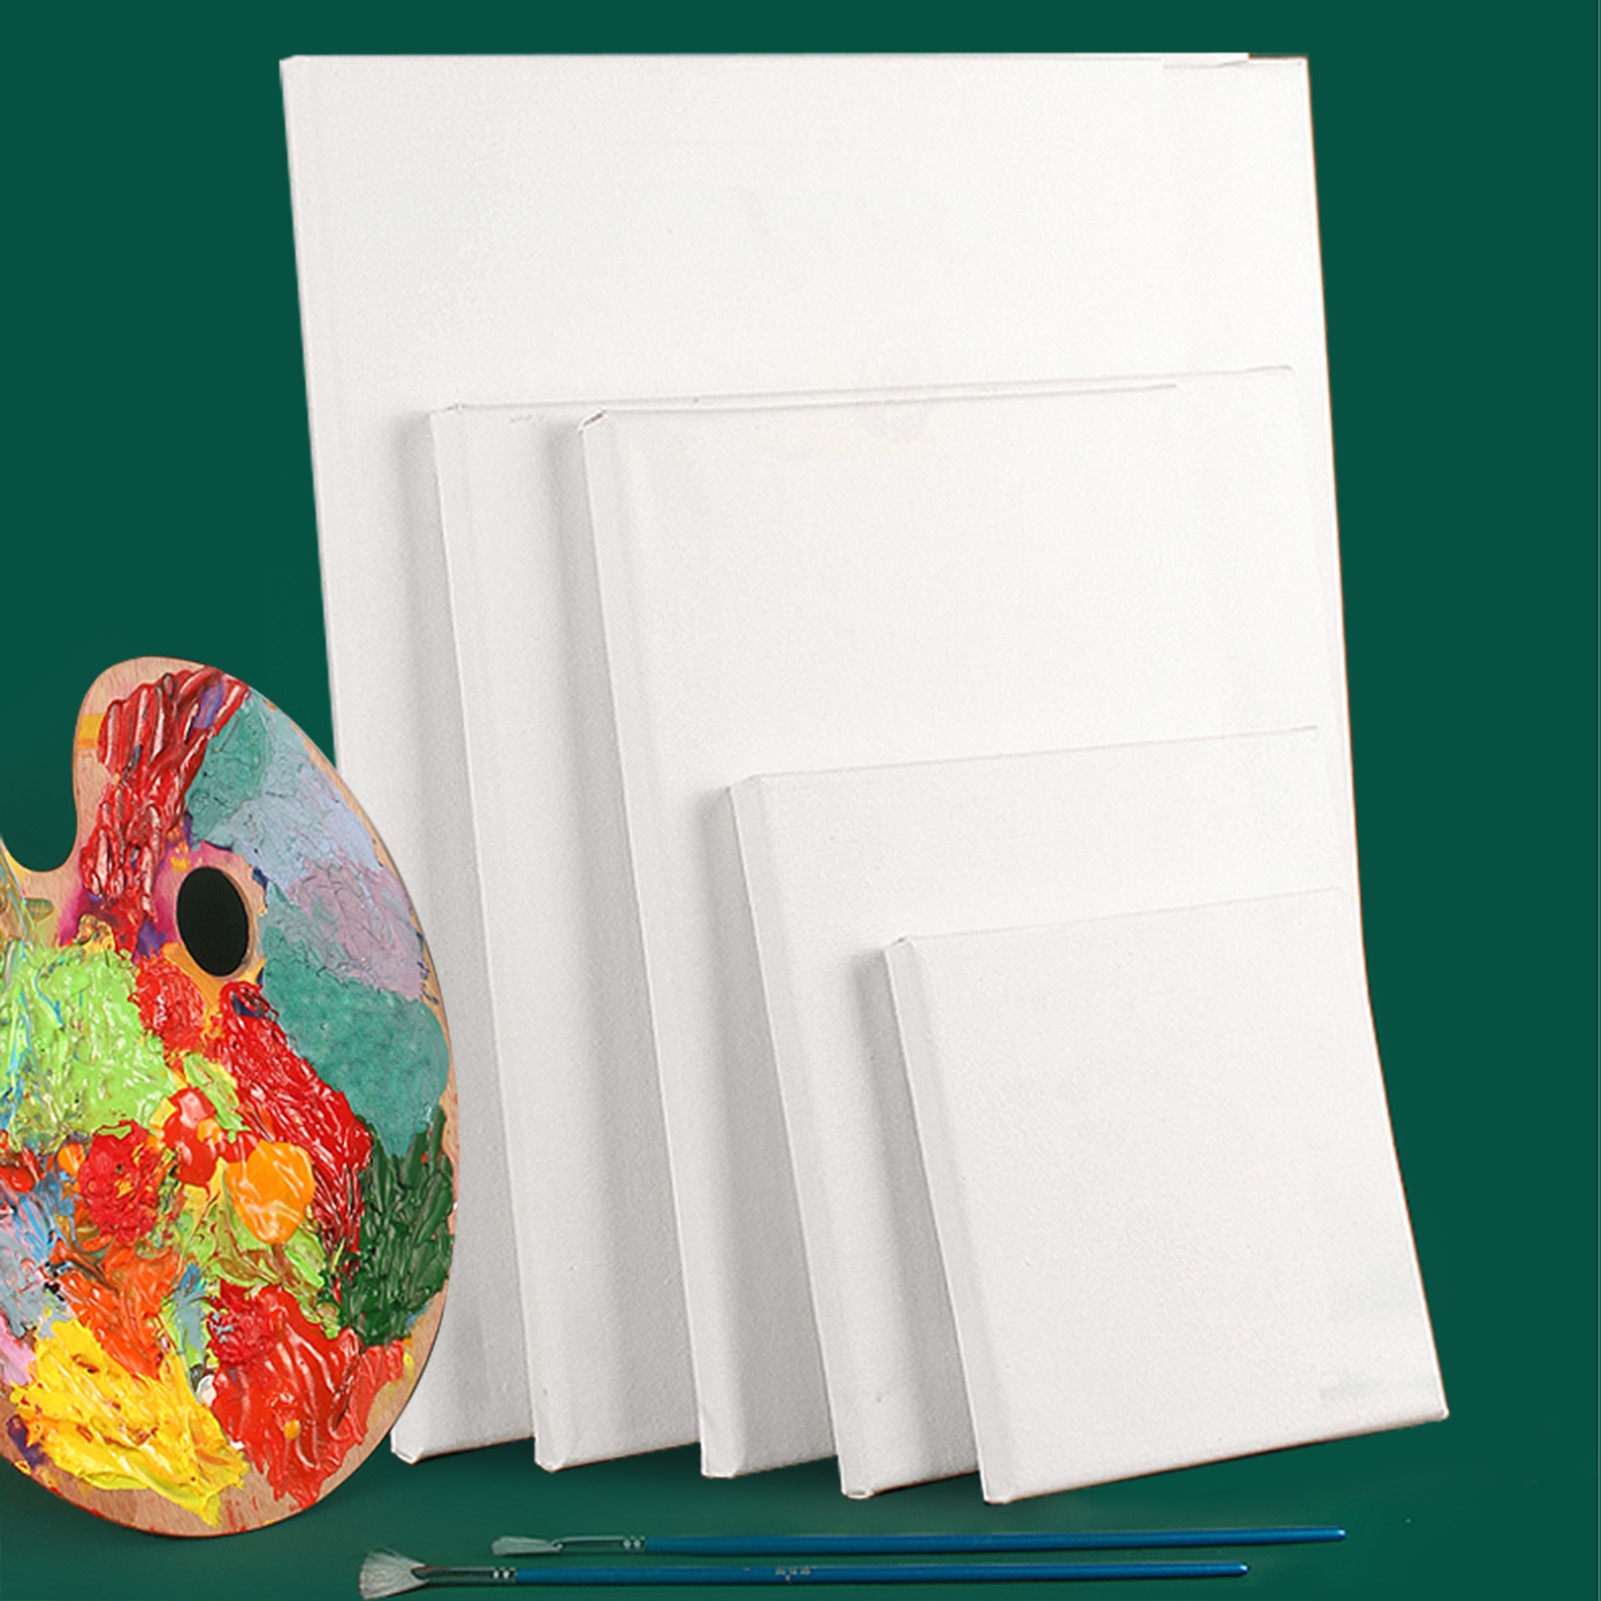 D-GROEE Artist Canvases for Painting, Blank White Canvas Boards - Cotton  Art Panels for Oil, Acrylic %26 Watercolor Paint